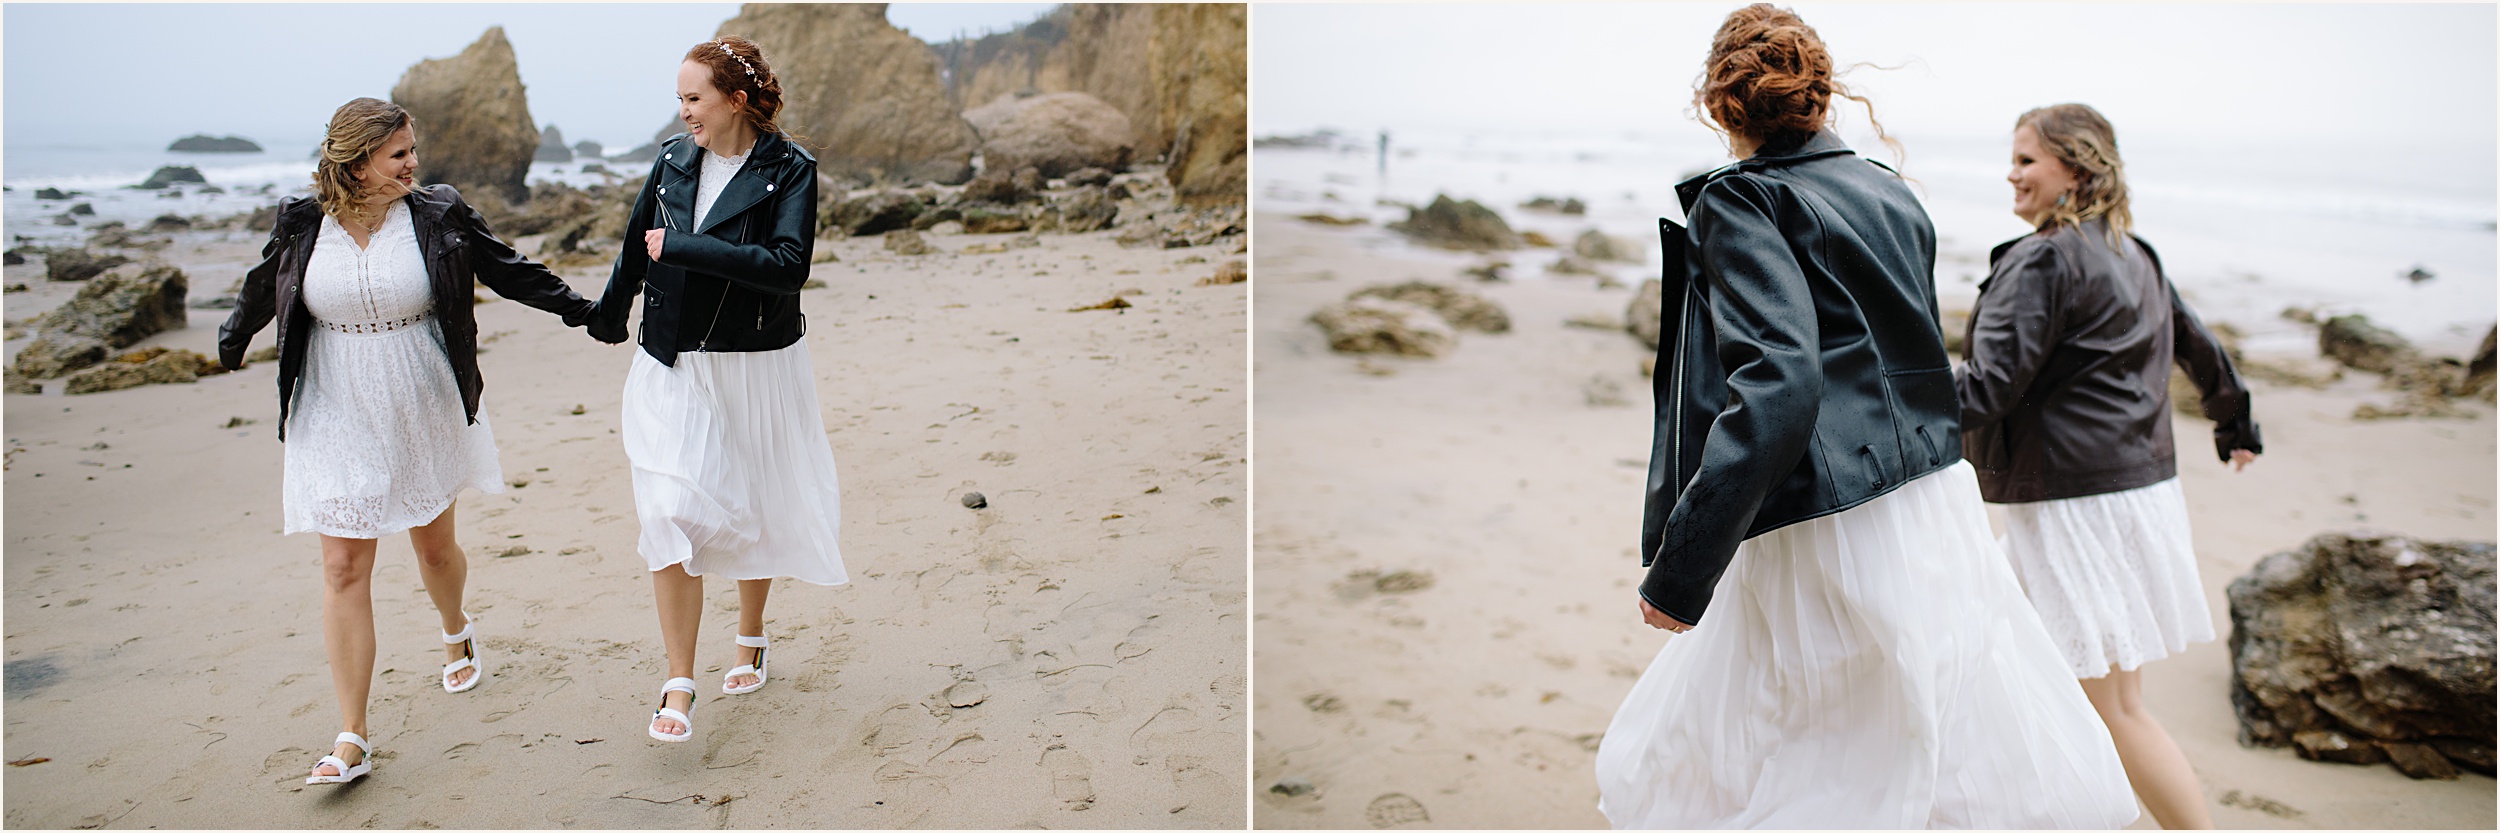 Photo of brides running down El Matador beach in stunning white lace elopement dresses and leather jackets